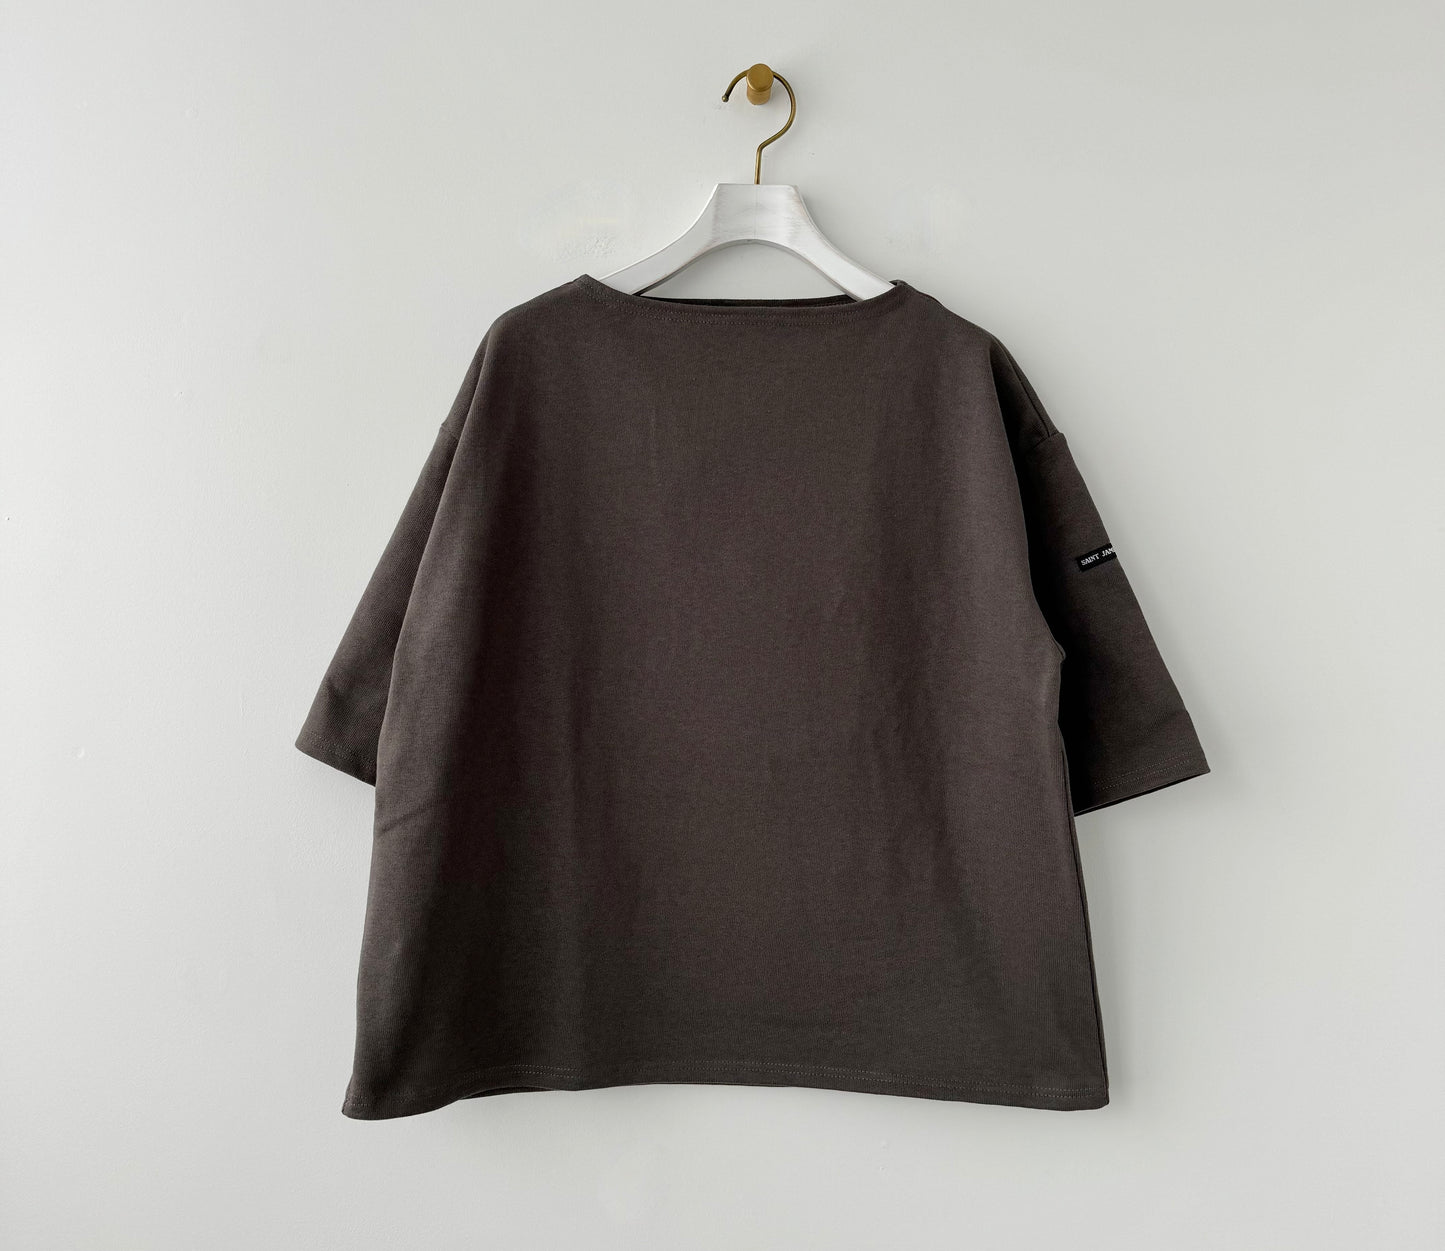 OUESSANT TEE LOOSE (TAUPE)　SAINT JAMES セントジェームス　通販　取扱店